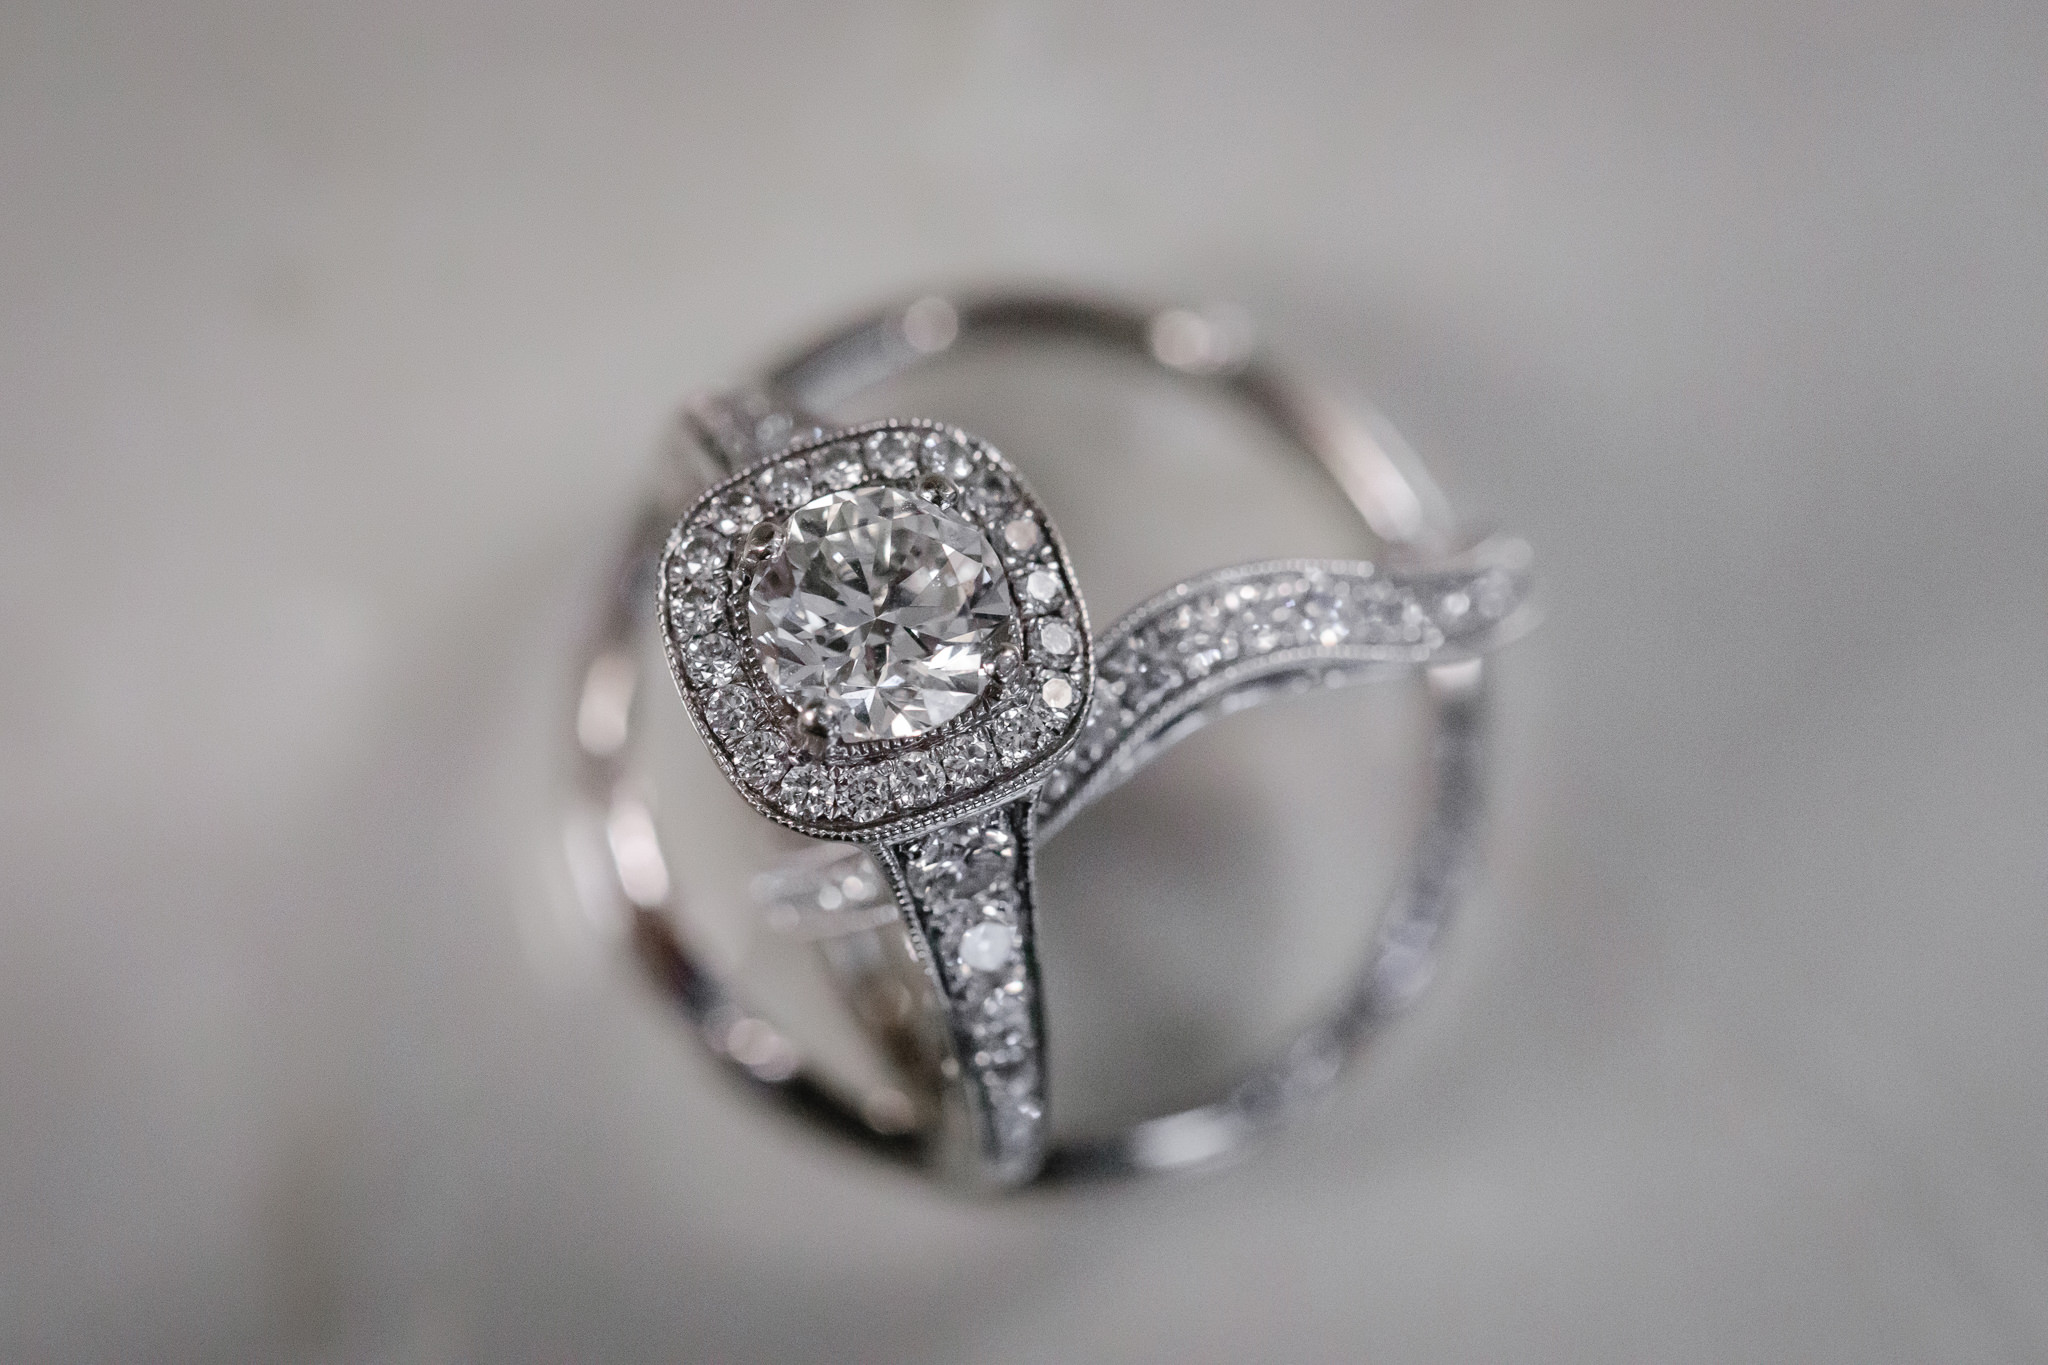 Diamond engagement ring propped up by a wedding band